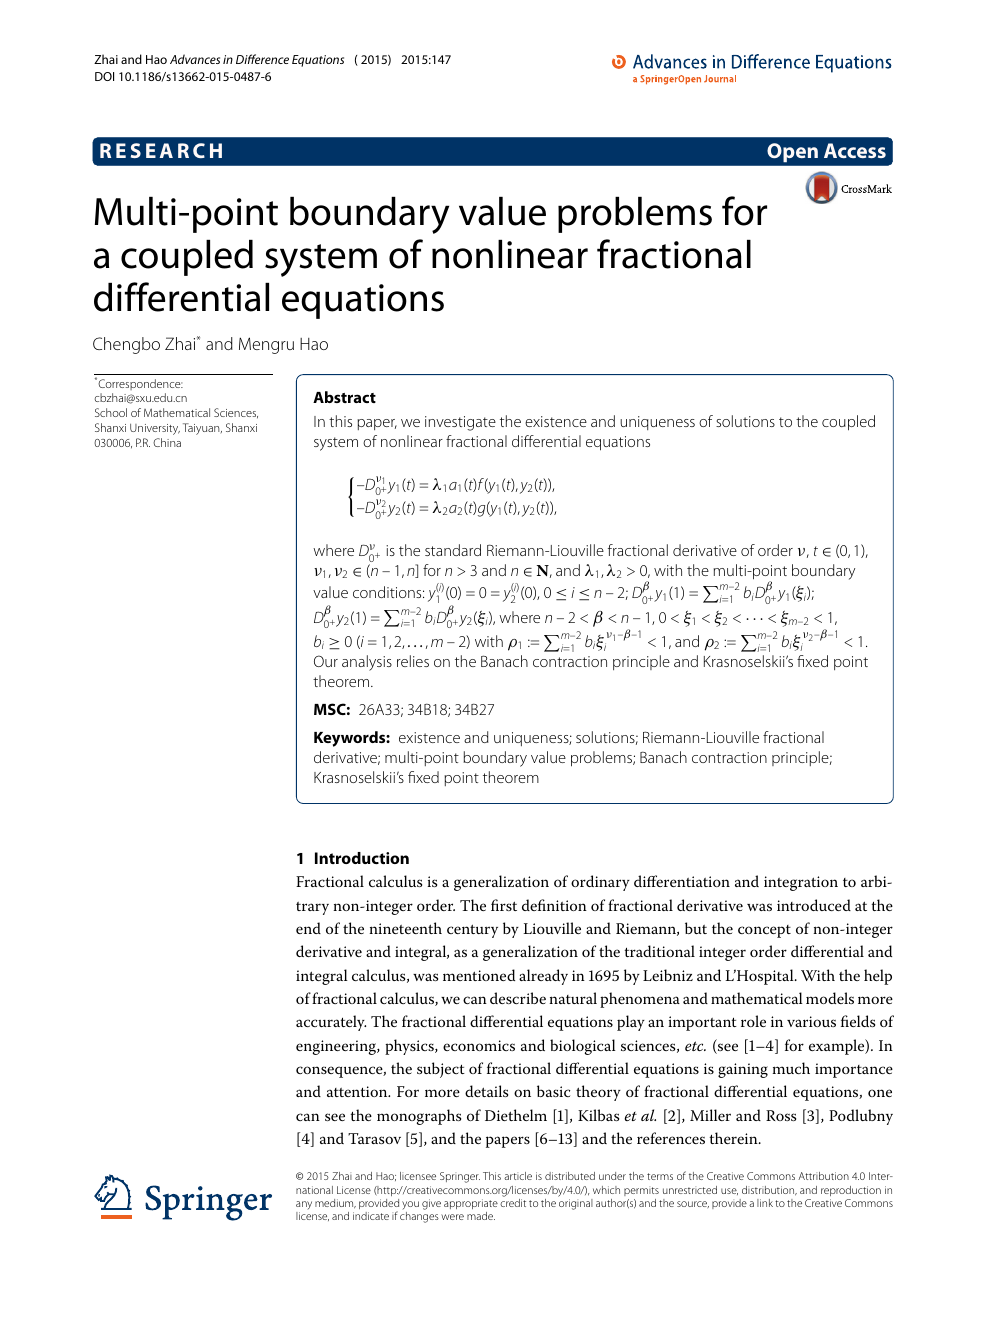 Multi Point Boundary Value Problems For A Coupled System Of Nonlinear Fractional Differential Equations Topic Of Research Paper In Mathematics Download Scholarly Article Pdf And Read For Free On Cyberleninka Open Science